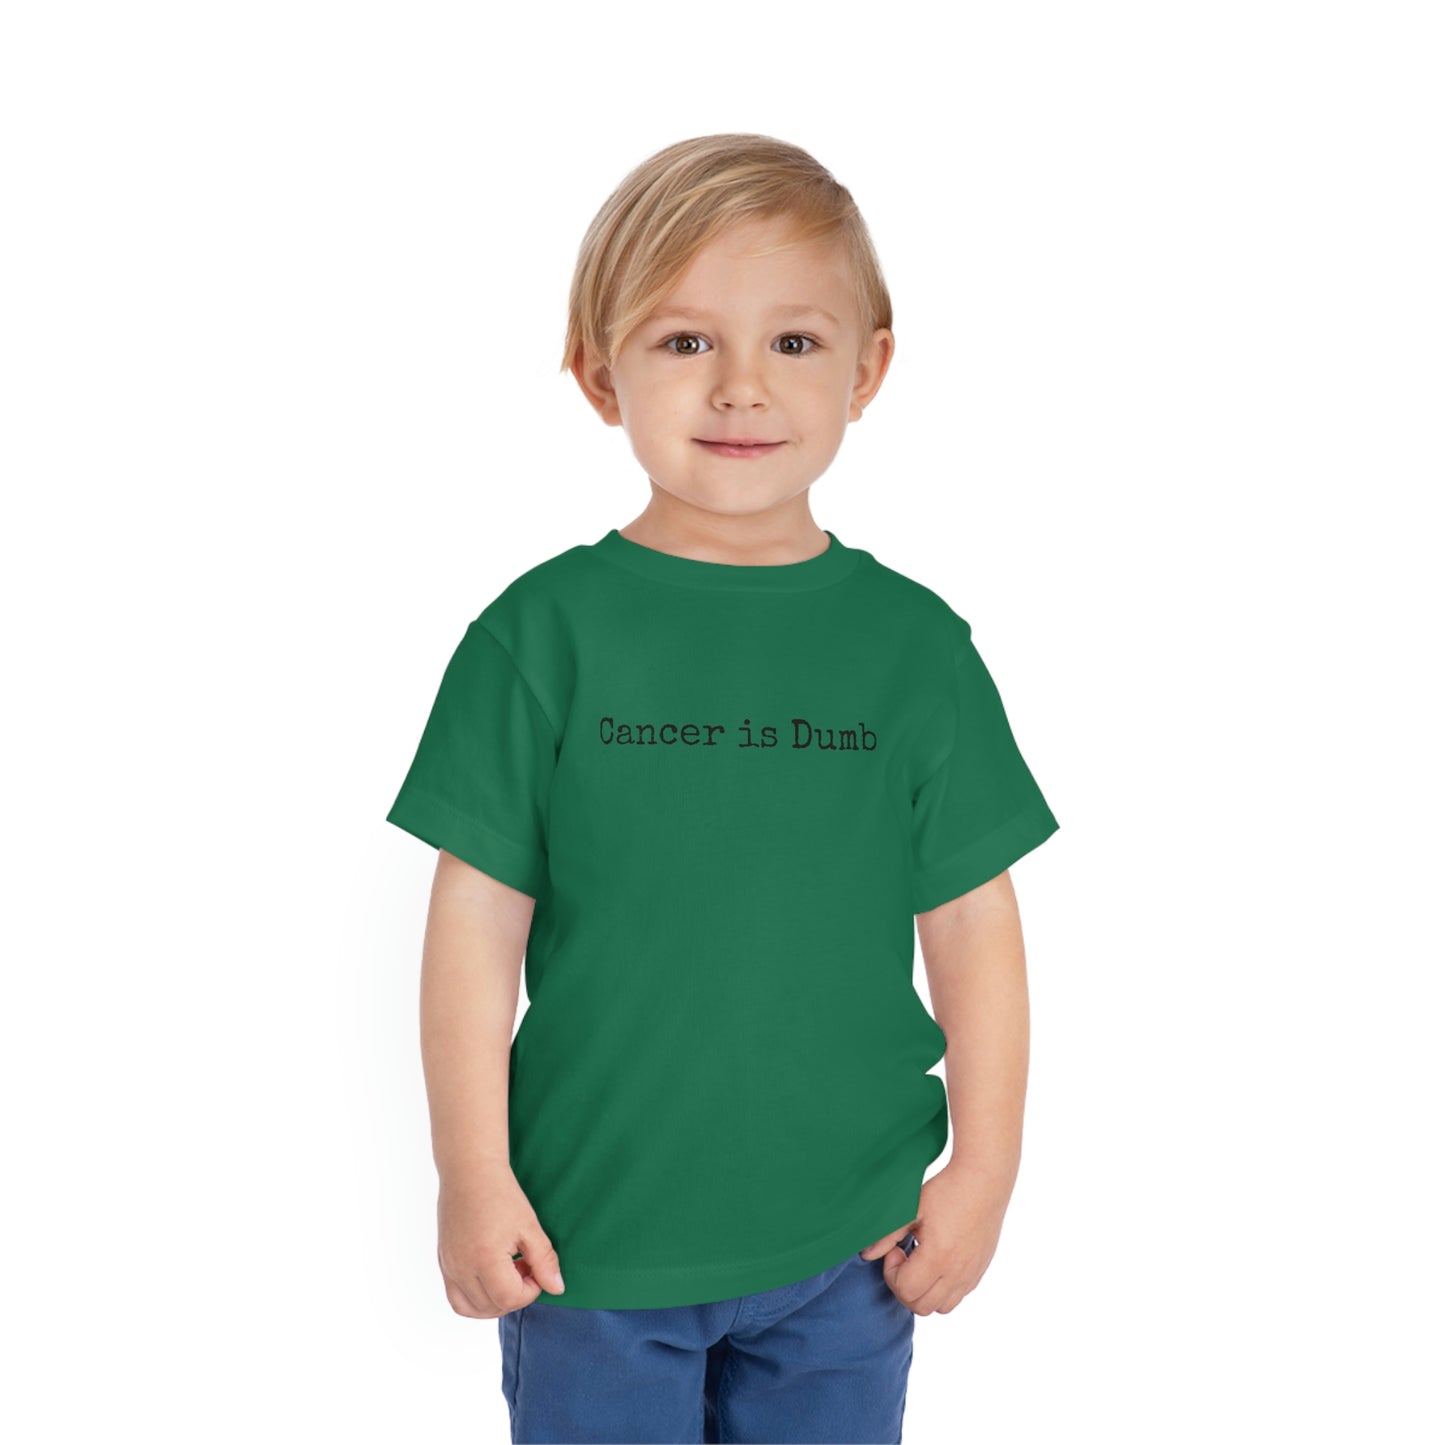 Toddler Short Sleeve Tee T Shirt Childrens tshirt Anti Cancer Cancer is Dumb Survivor Support Humorous Funny Kids Apparel